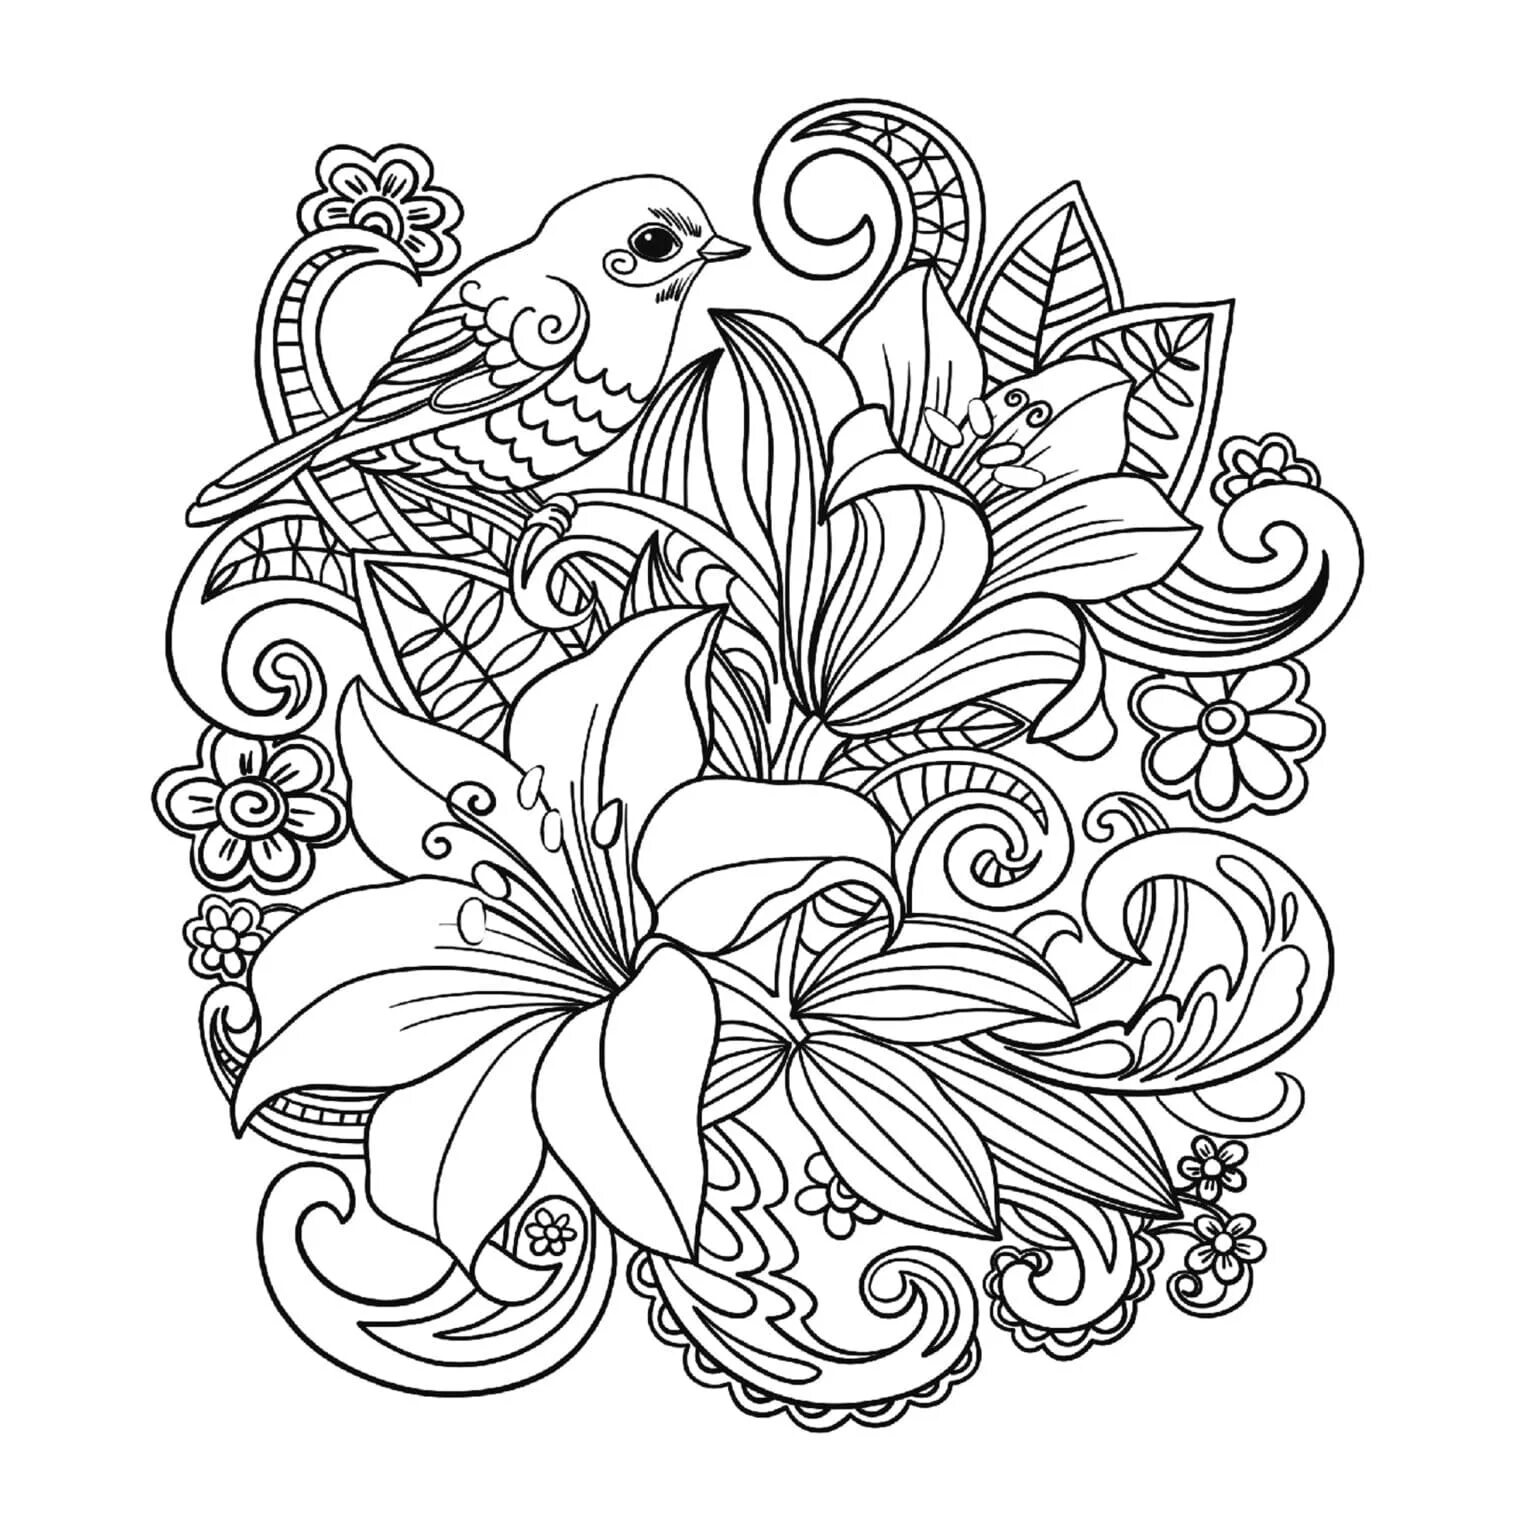 Blissful intricate flower coloring book